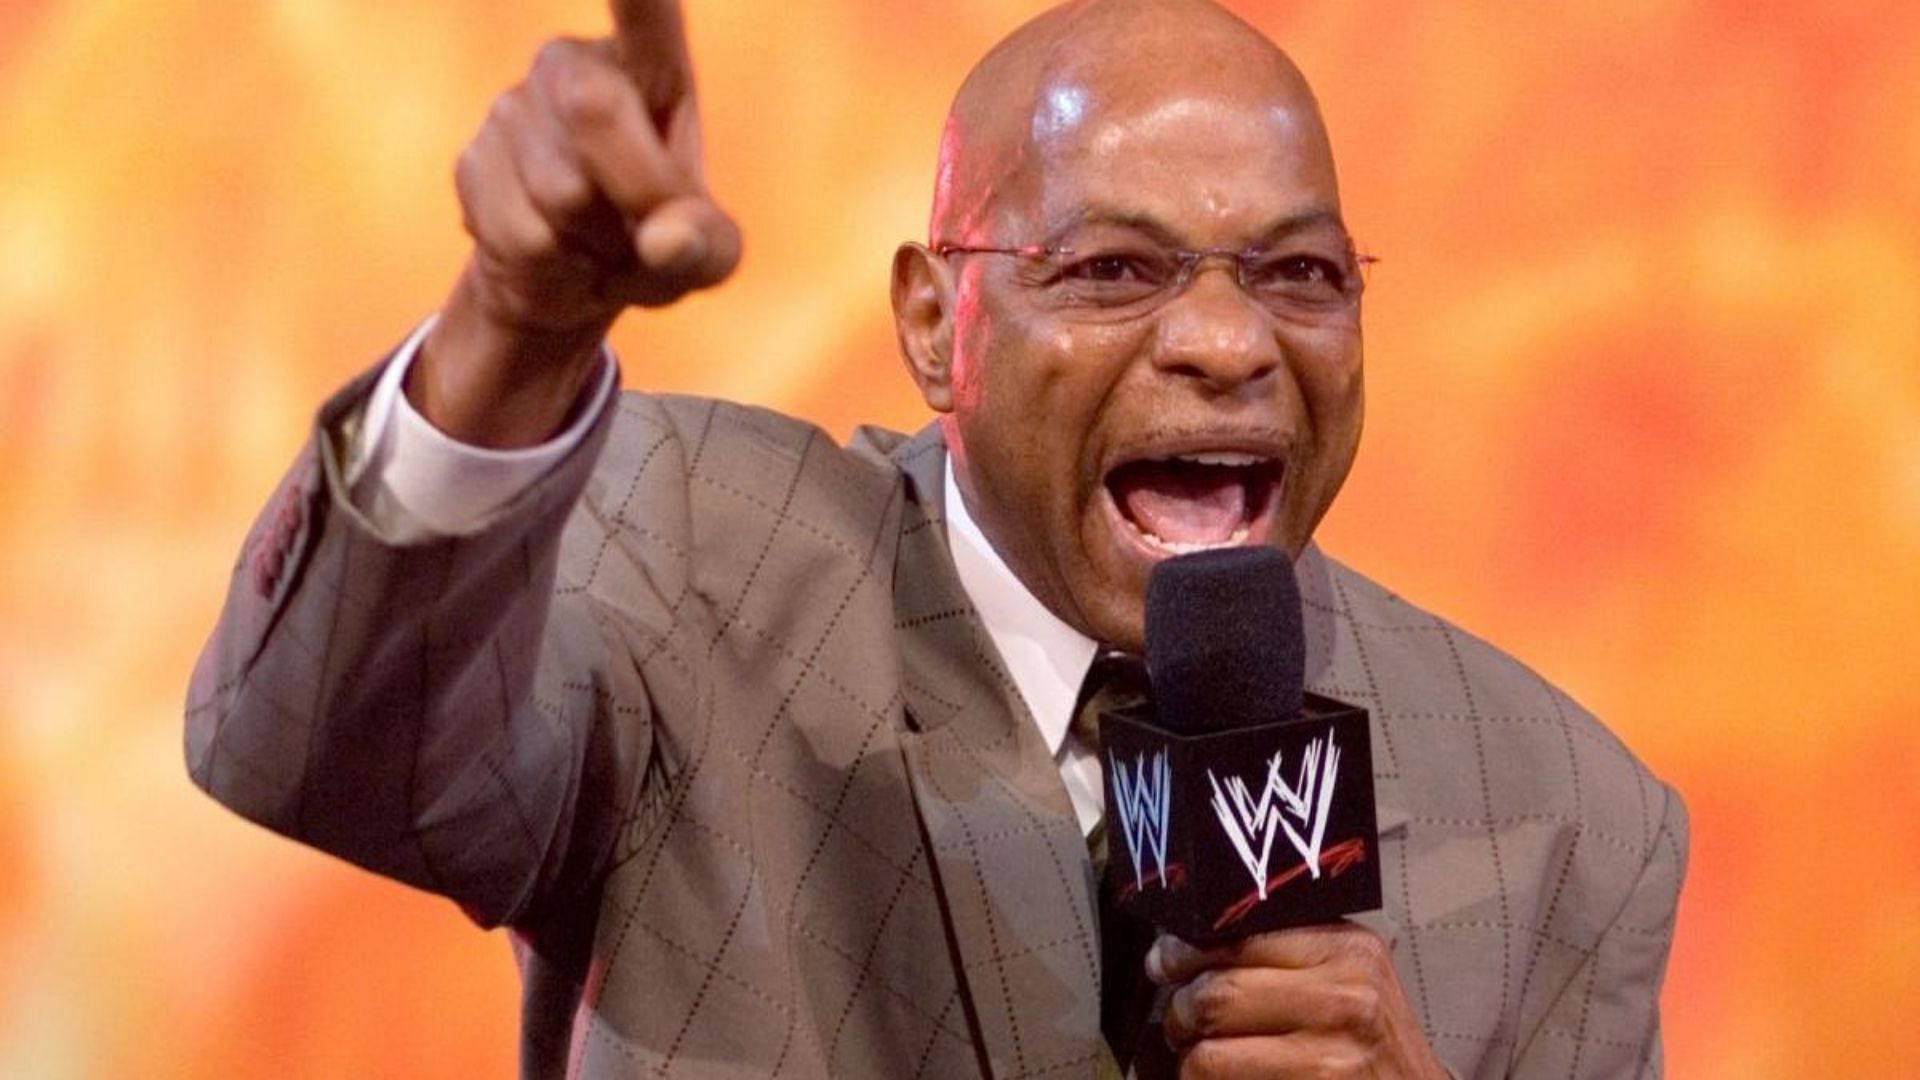 Teddy Long had some interesting things to say this week